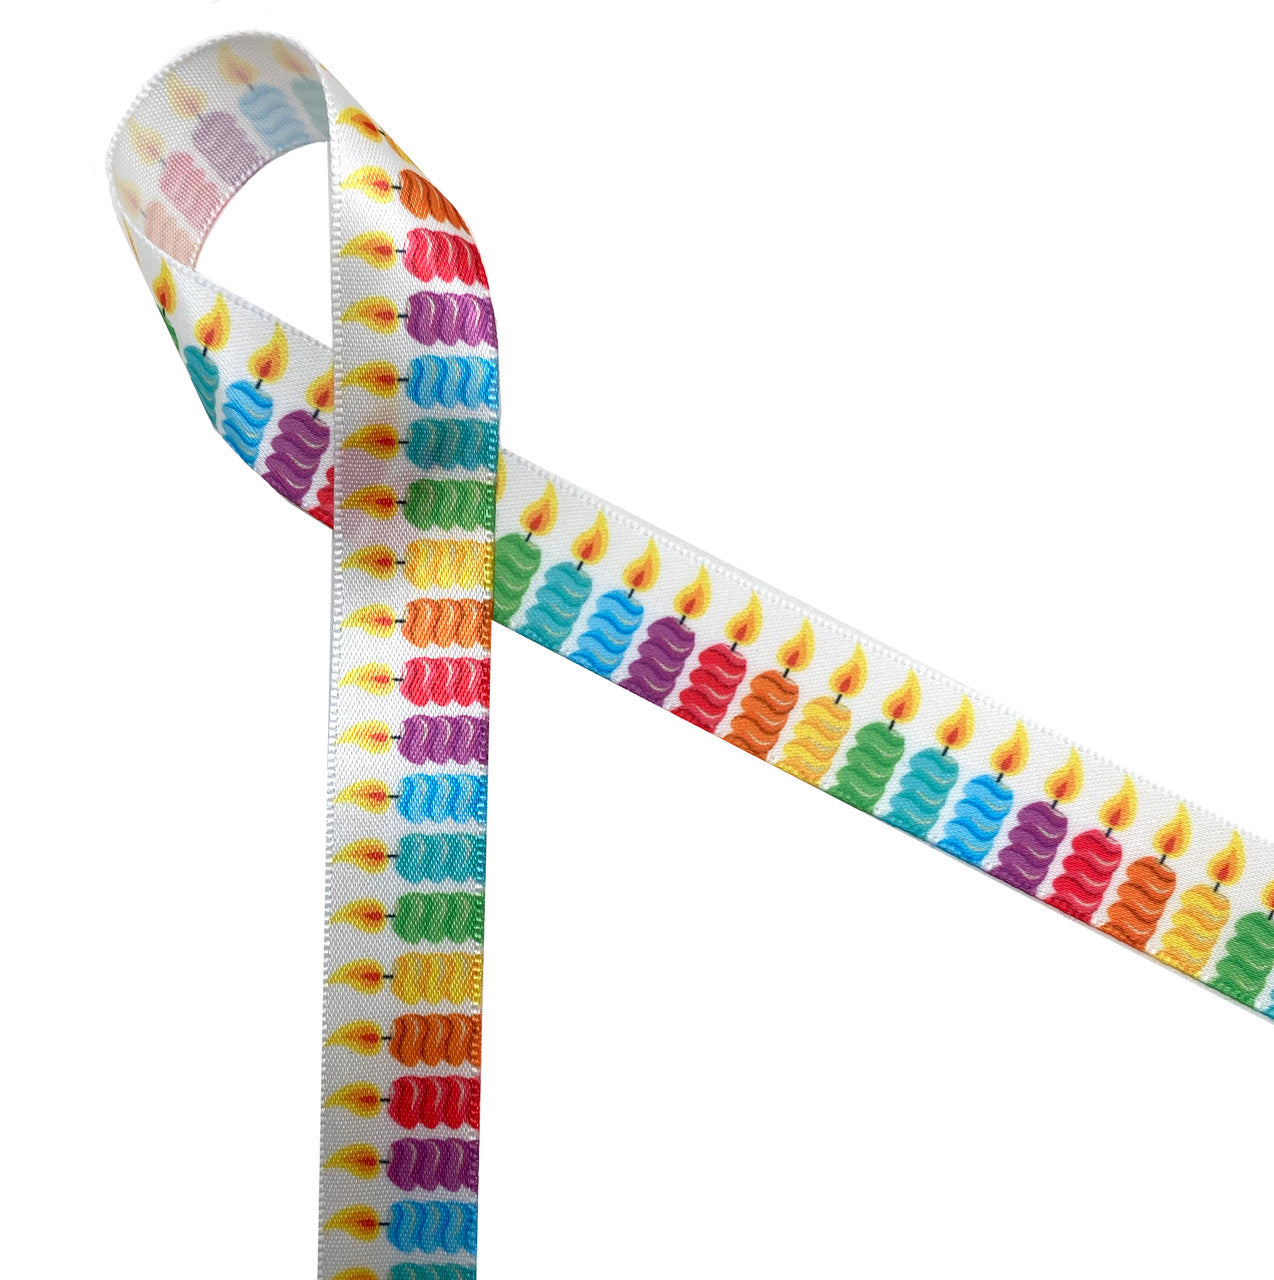 Birthday candles ribbon in primary colors printed on 5/8" white single face satin